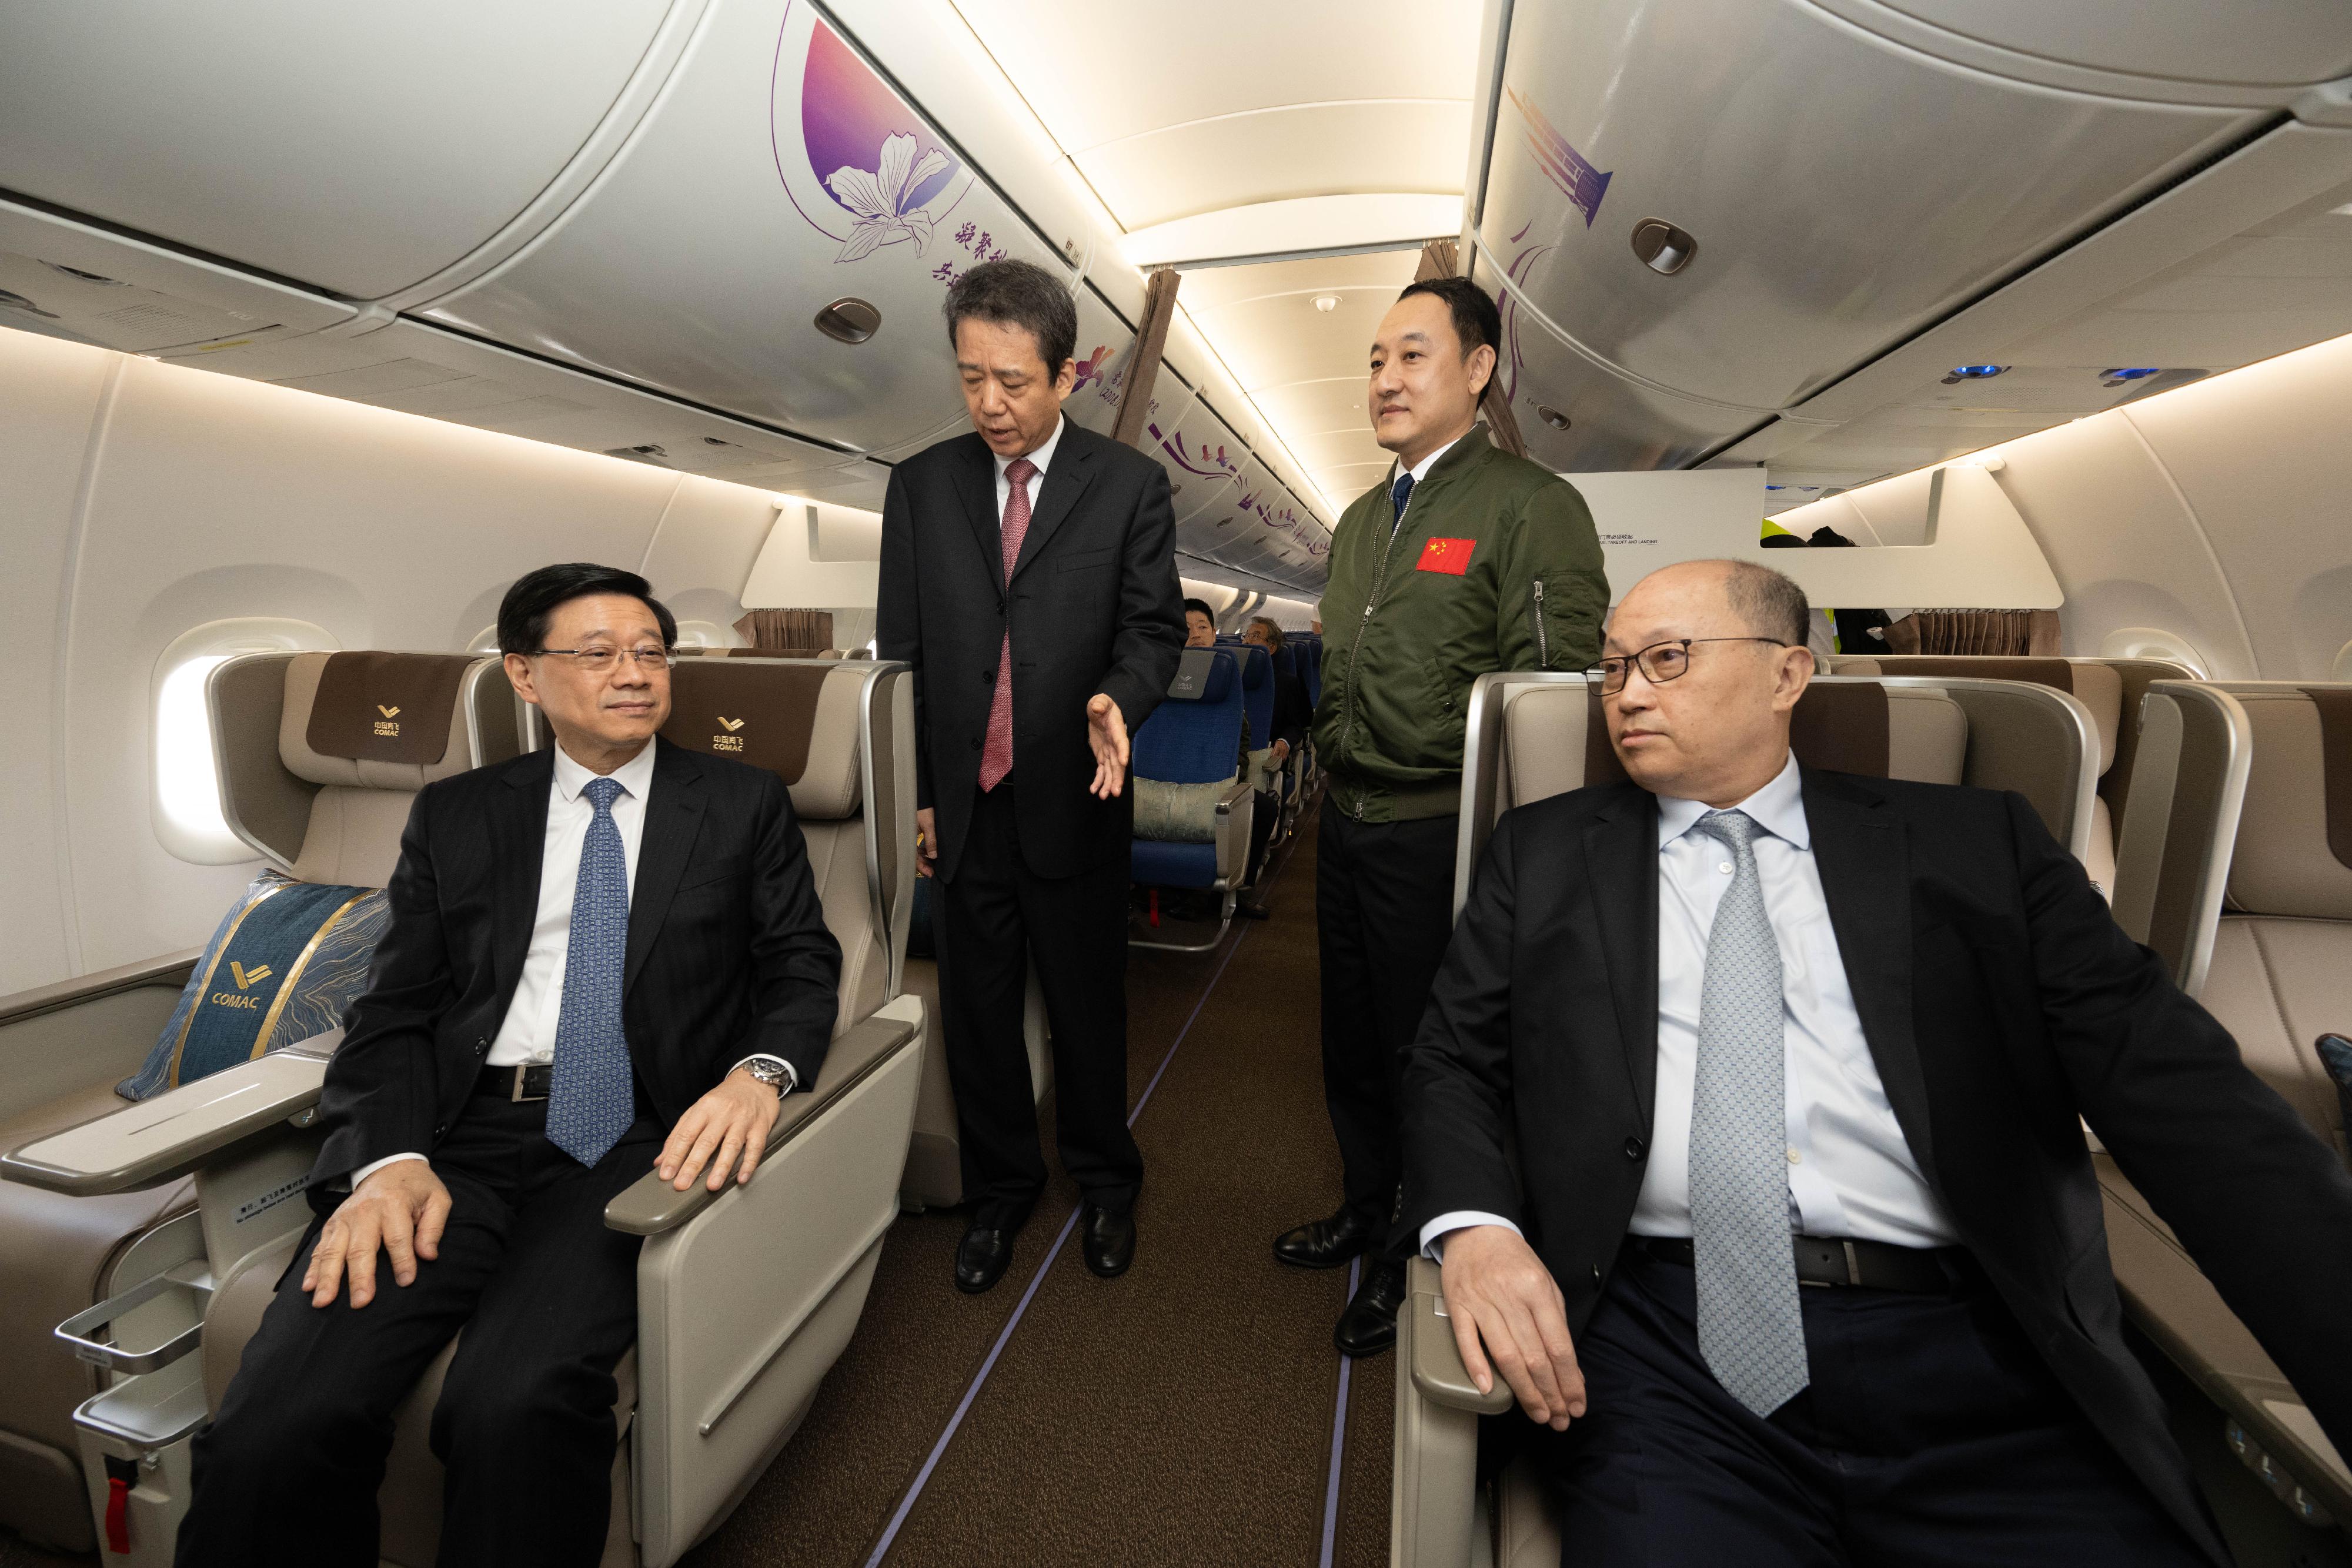 The Chief Executive, Mr John Lee, attended the welcome ceremony for aircraft C919 and ARJ21 today (December 13). Photo shows Mr Lee (front row, left) and the Director of the Liaison Office of the Central People's Government in the Hong Kong Special Administrative Region, Mr Zheng Yanxiong (front row, right), being briefed by Deputy Administrator of the Civil Aviation Administration of China Mr Cui Xiaofeng (back row, left), in the business class cabin of aircraft C919.